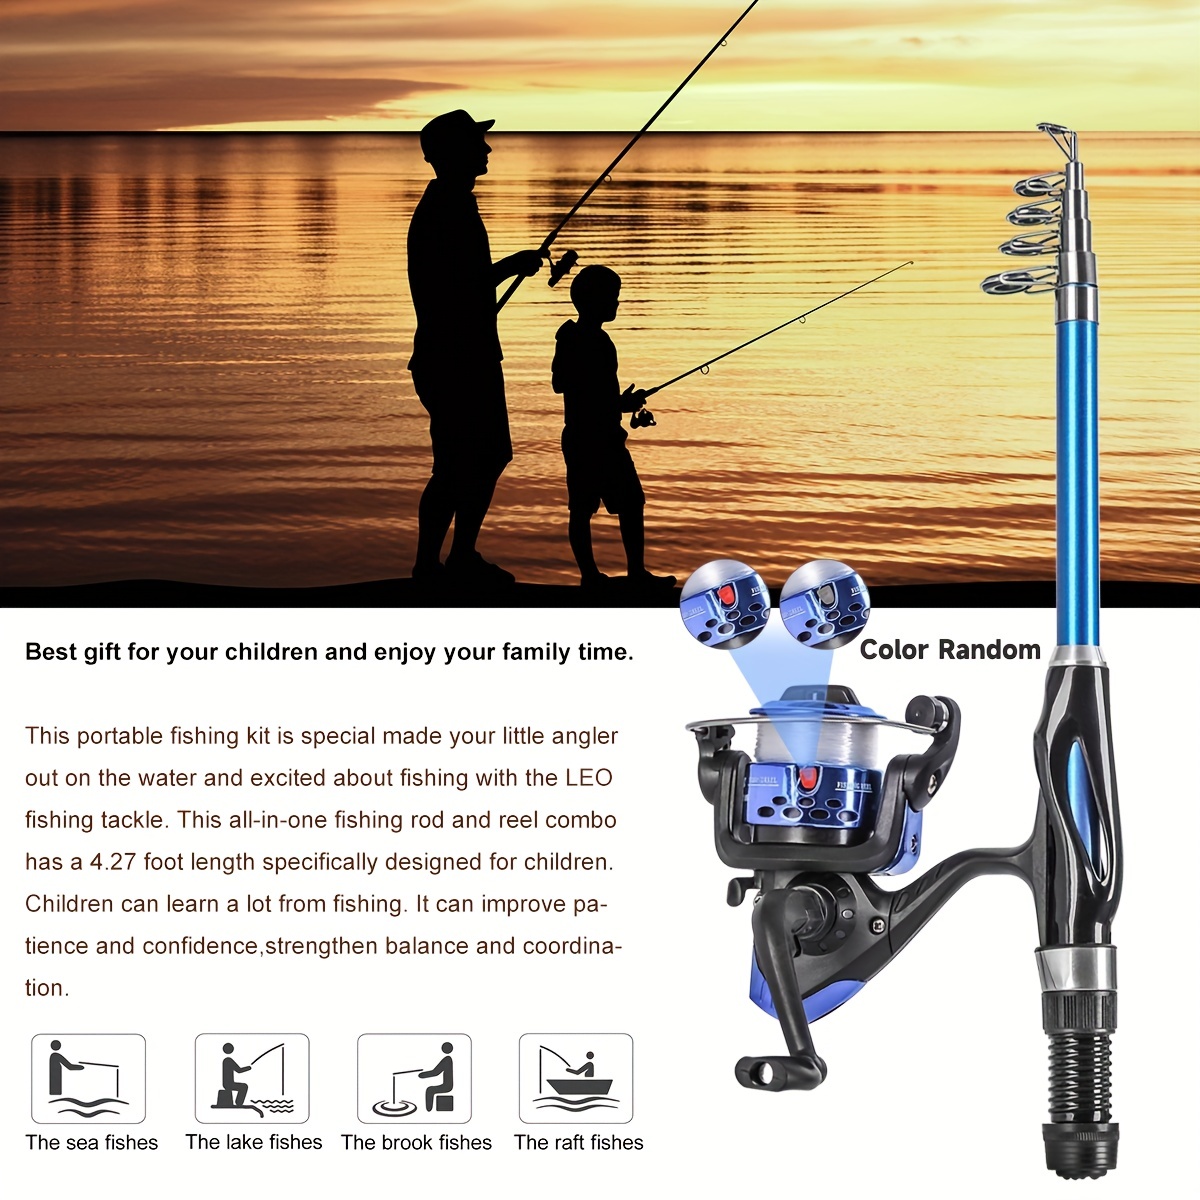 Folable Fishing Rod And Reel Combos For Kids Children, Fishing Full Kit  Travel Fishing Pole With Spinning Reel, Carrier Bag, Tackles For Starter -  Red